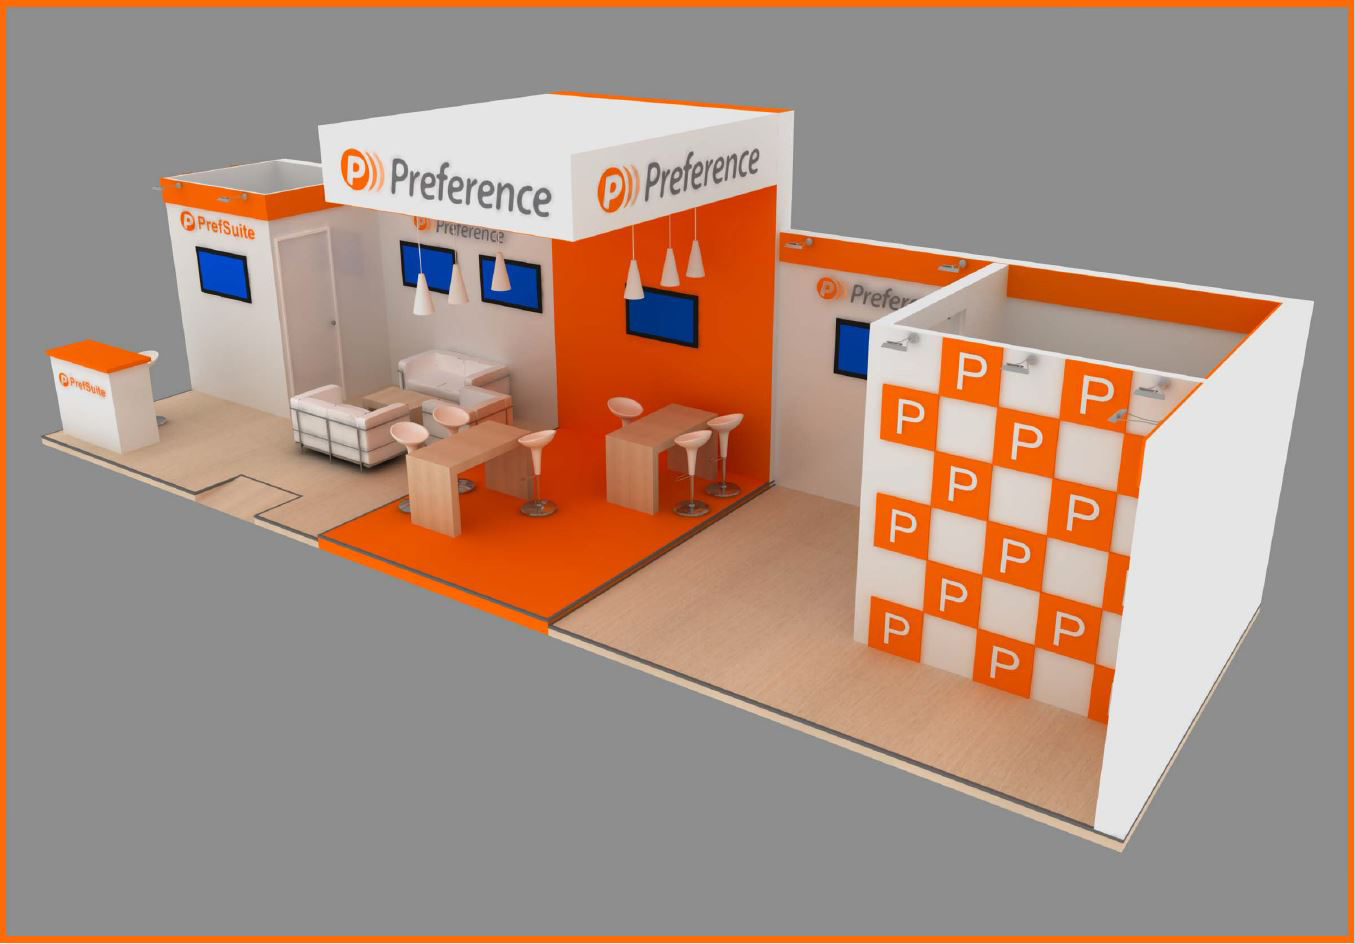 Stand Design for Preference at Veteco